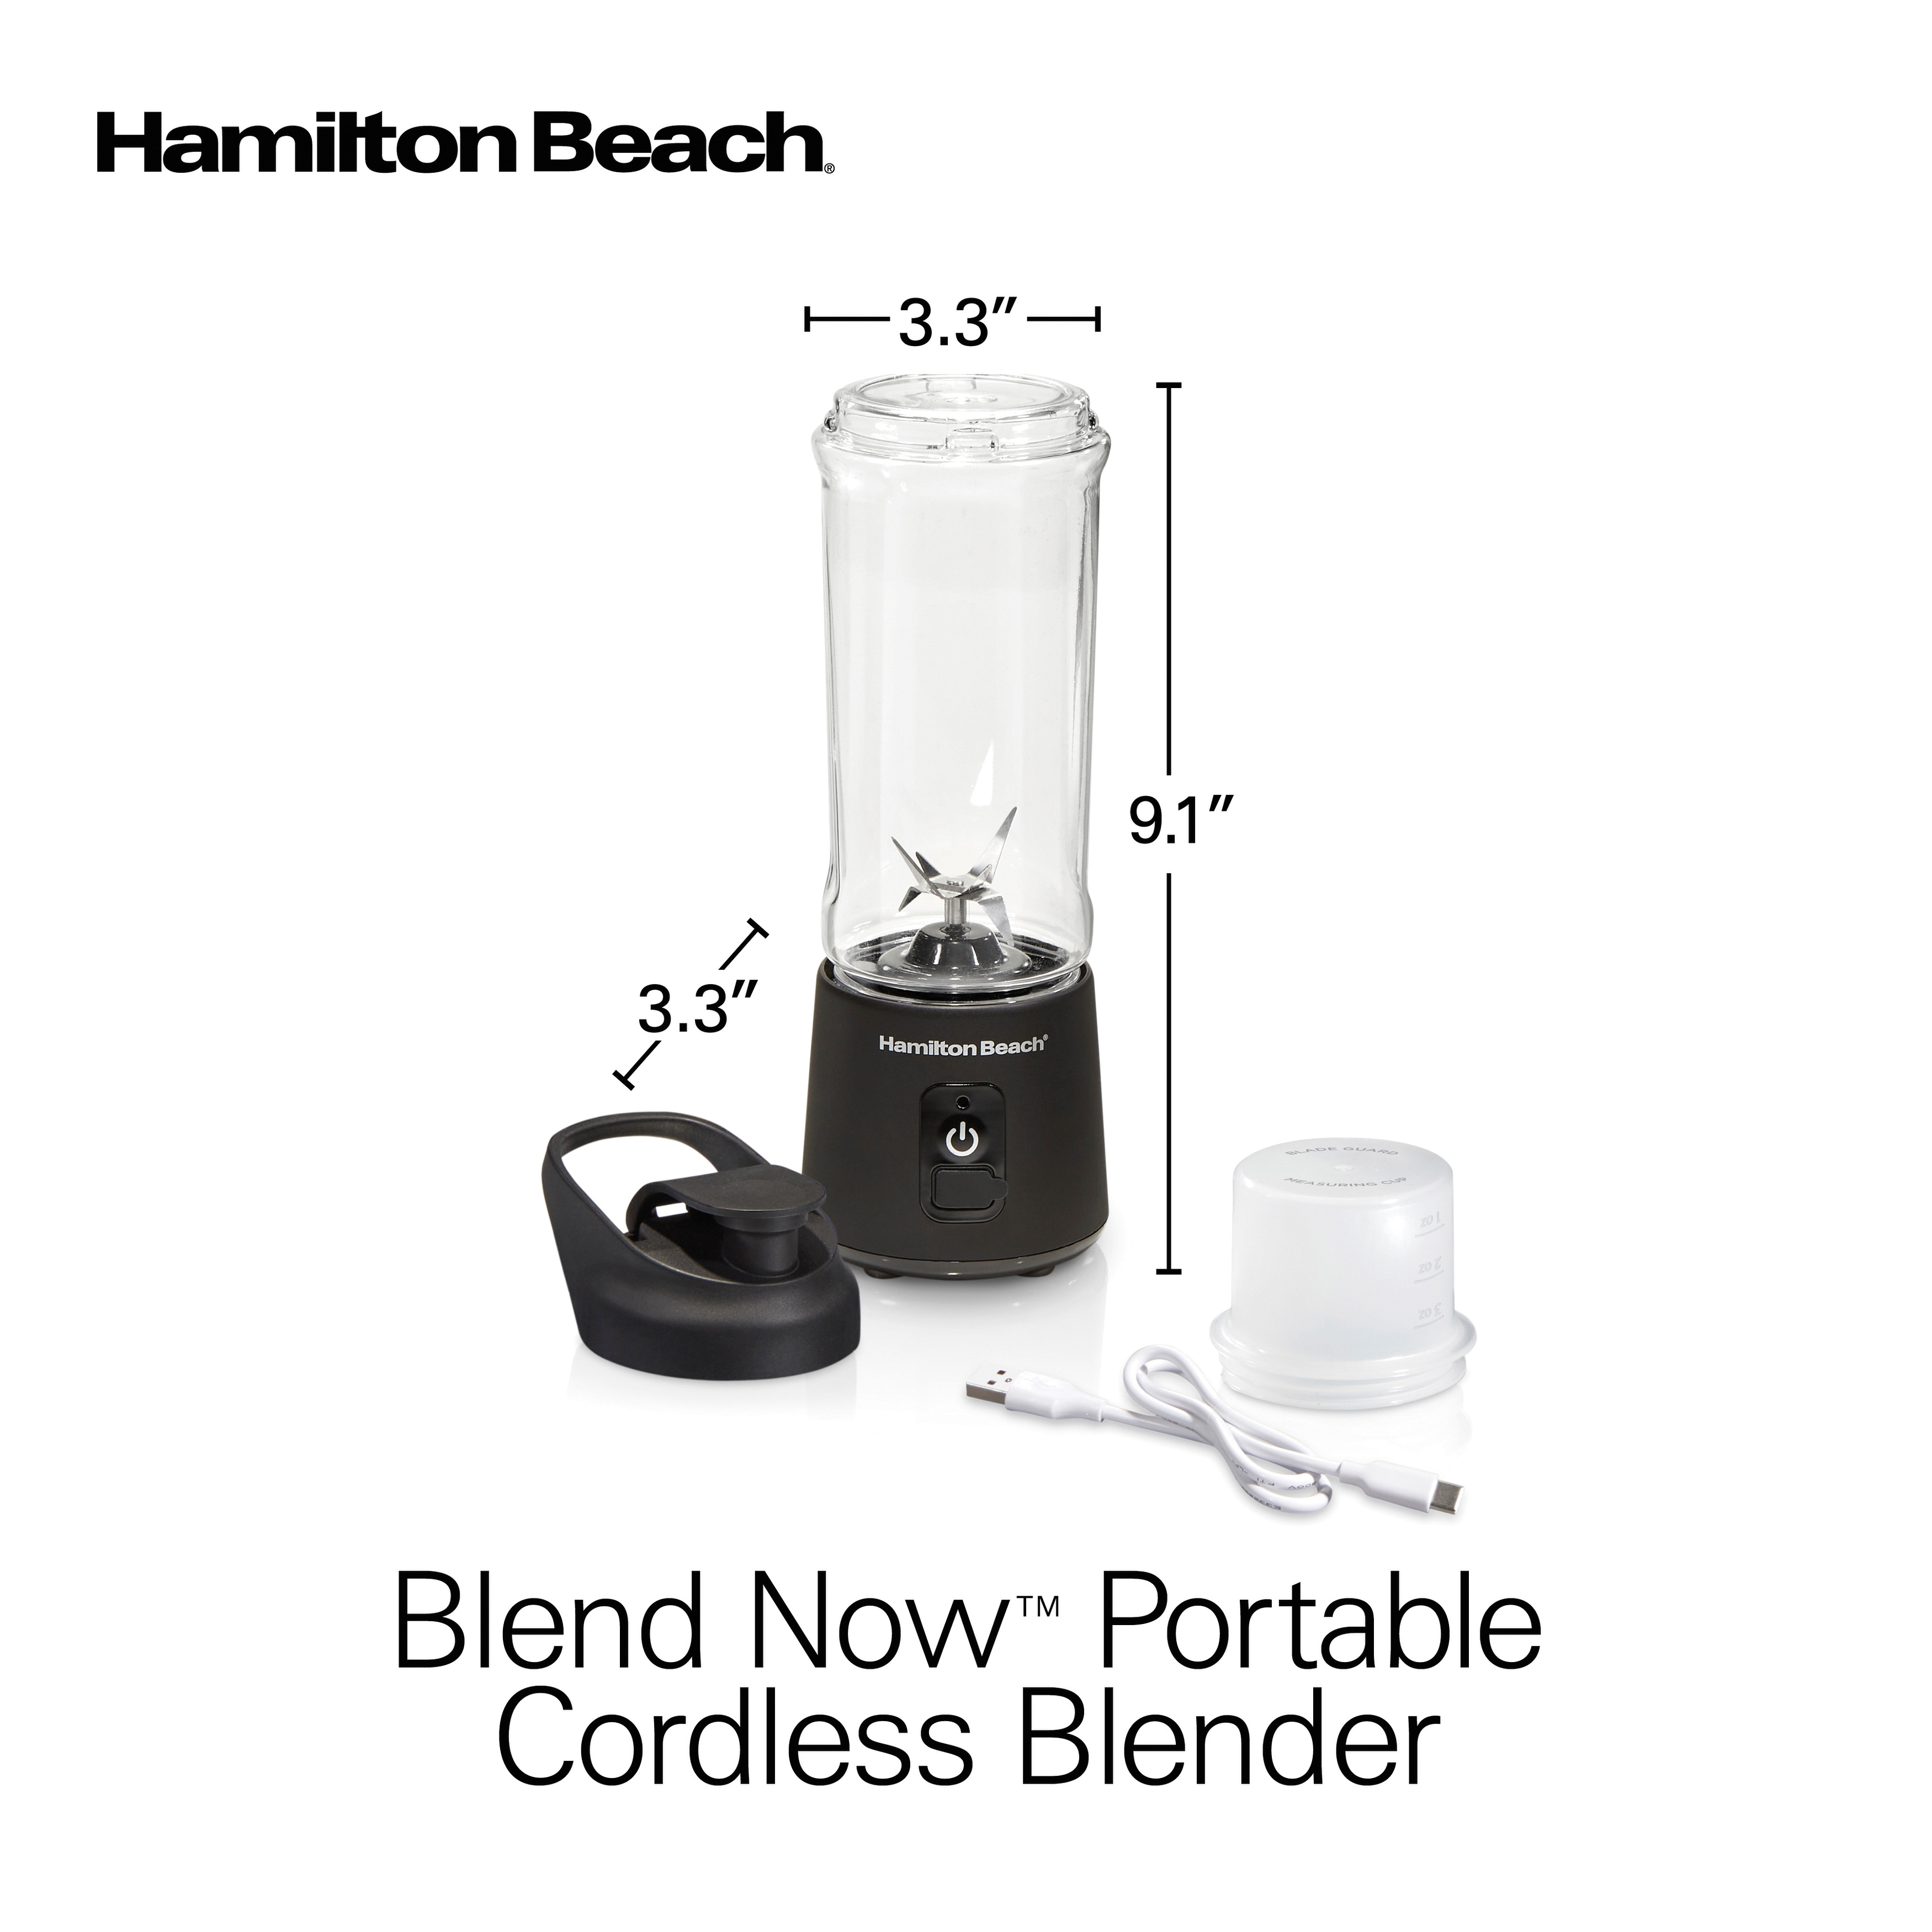 https://ak1.ostkcdn.com/images/products/is/images/direct/2c0f9ccb7214ef00716bf33ea0a0eacb083adf53/Blend-Now-Portable-Cordless-Blender.jpg